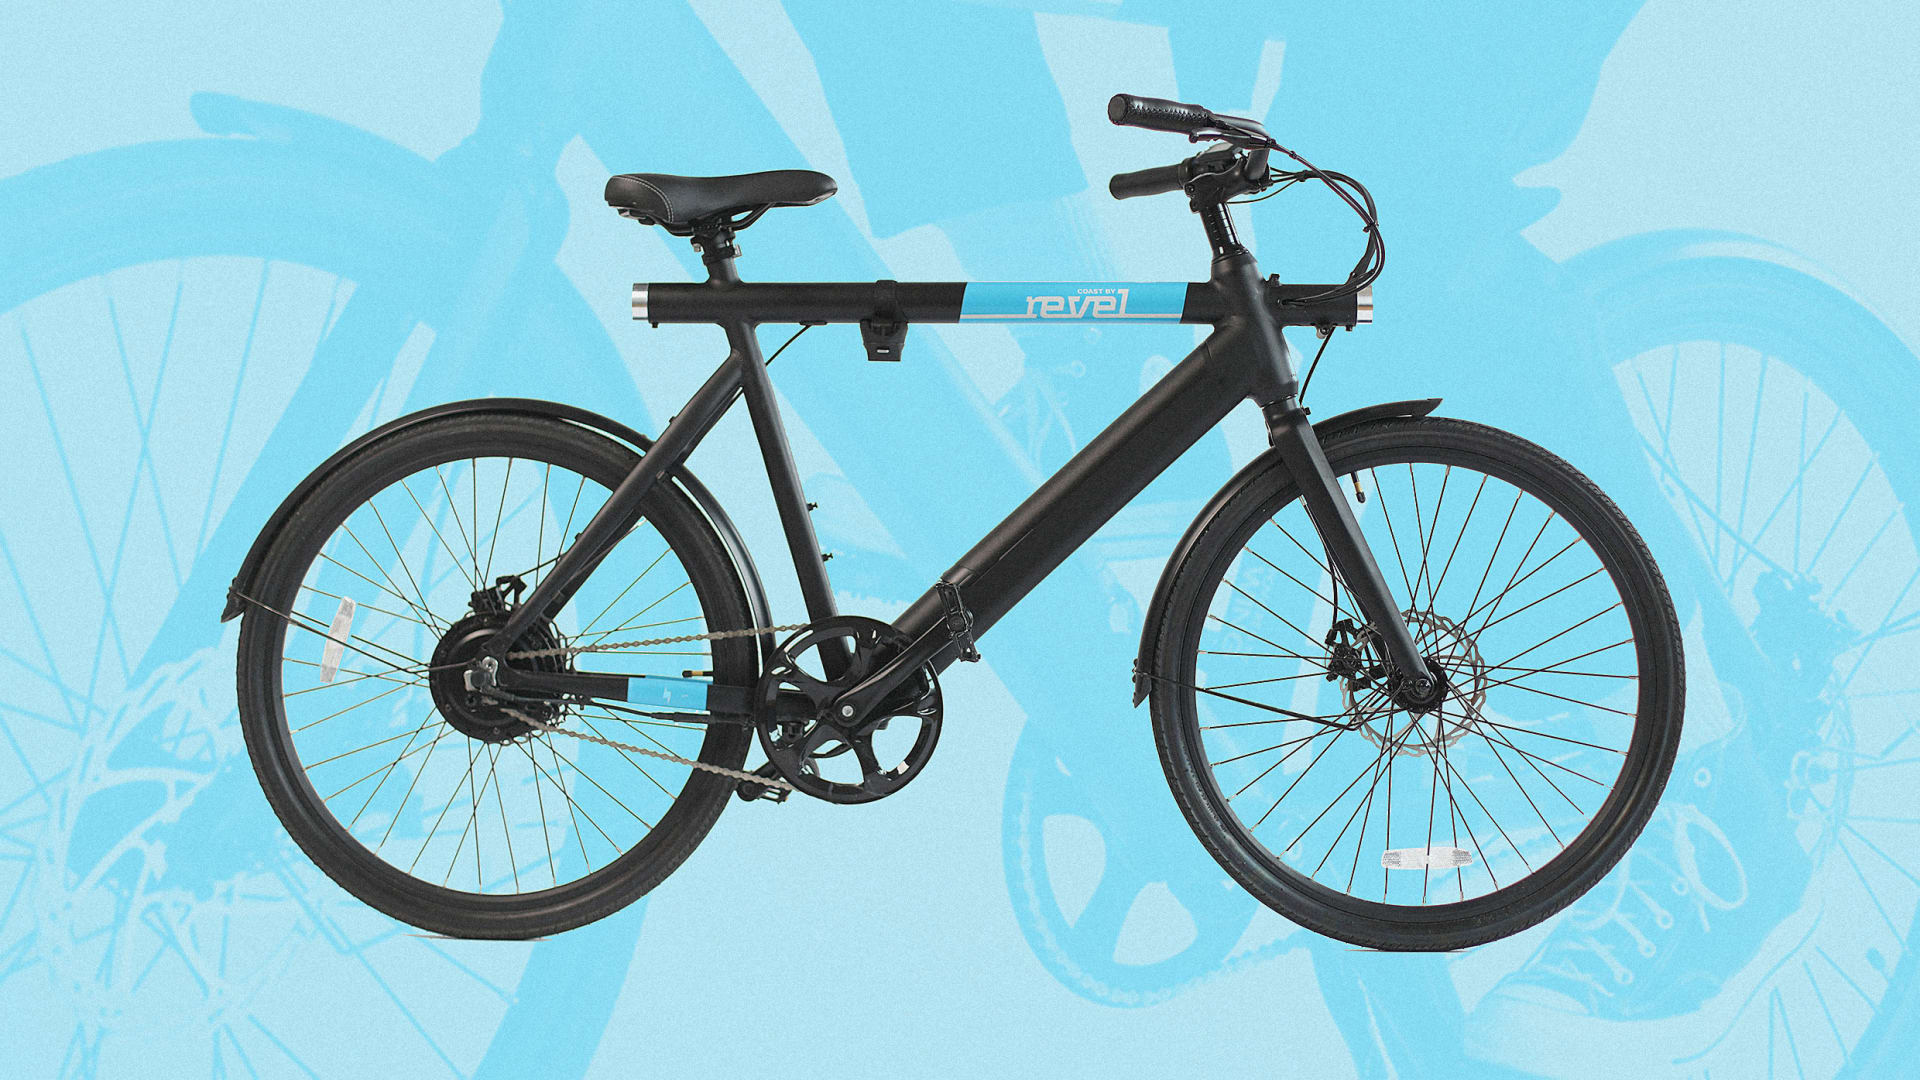 New Yorkers can now subscribe to their very own e-bike